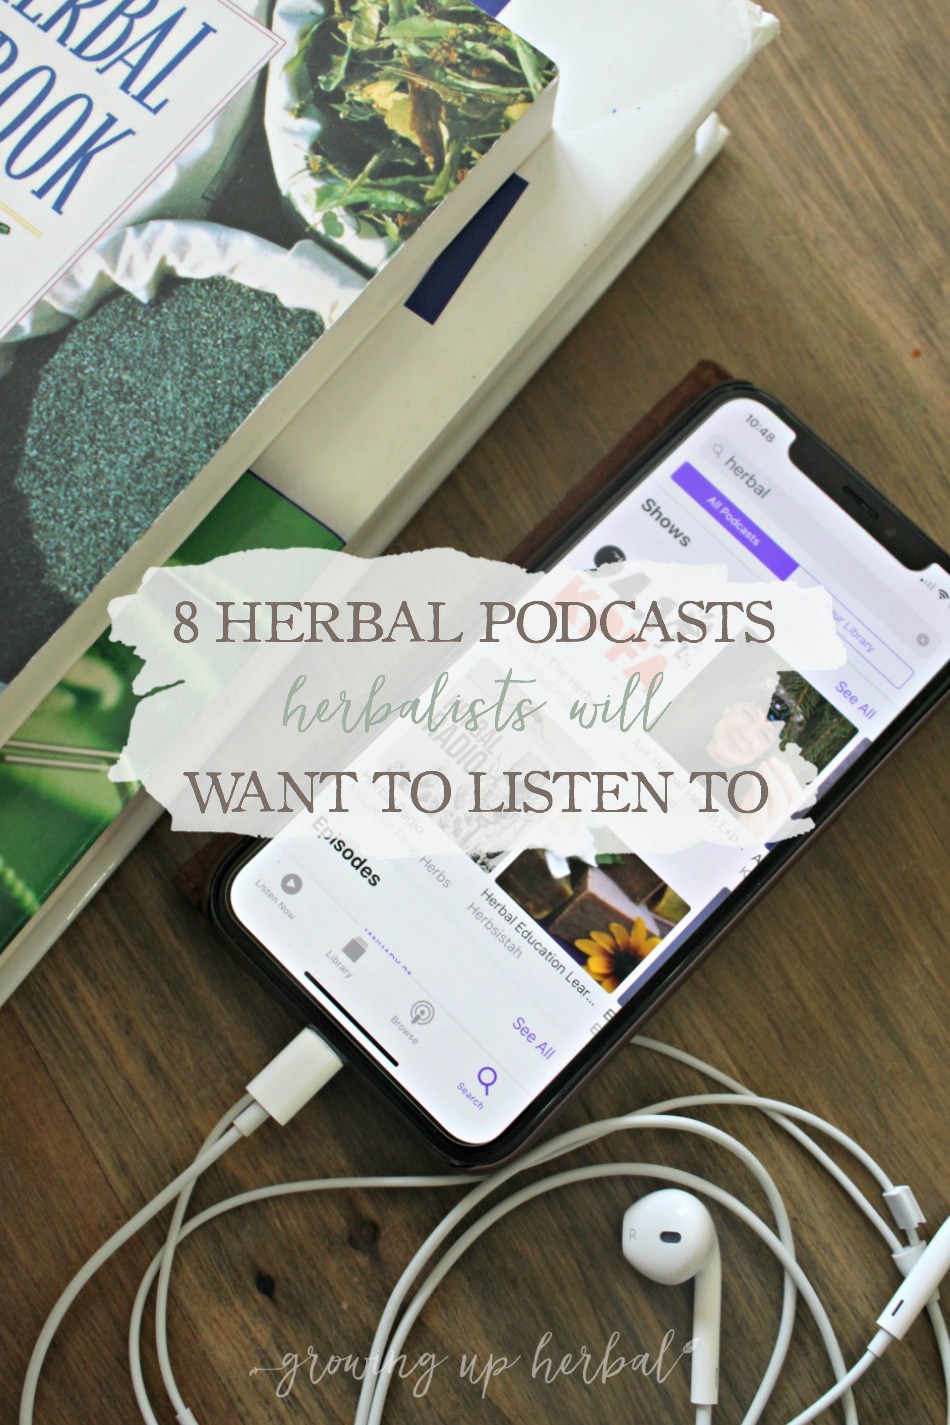 8 Herbal Podcasts Herbalists Will Want To Listen To | Growing Up Herbal | Looking for herbal podcasts to listen too? Here are 8 that can benefit your herbal education!